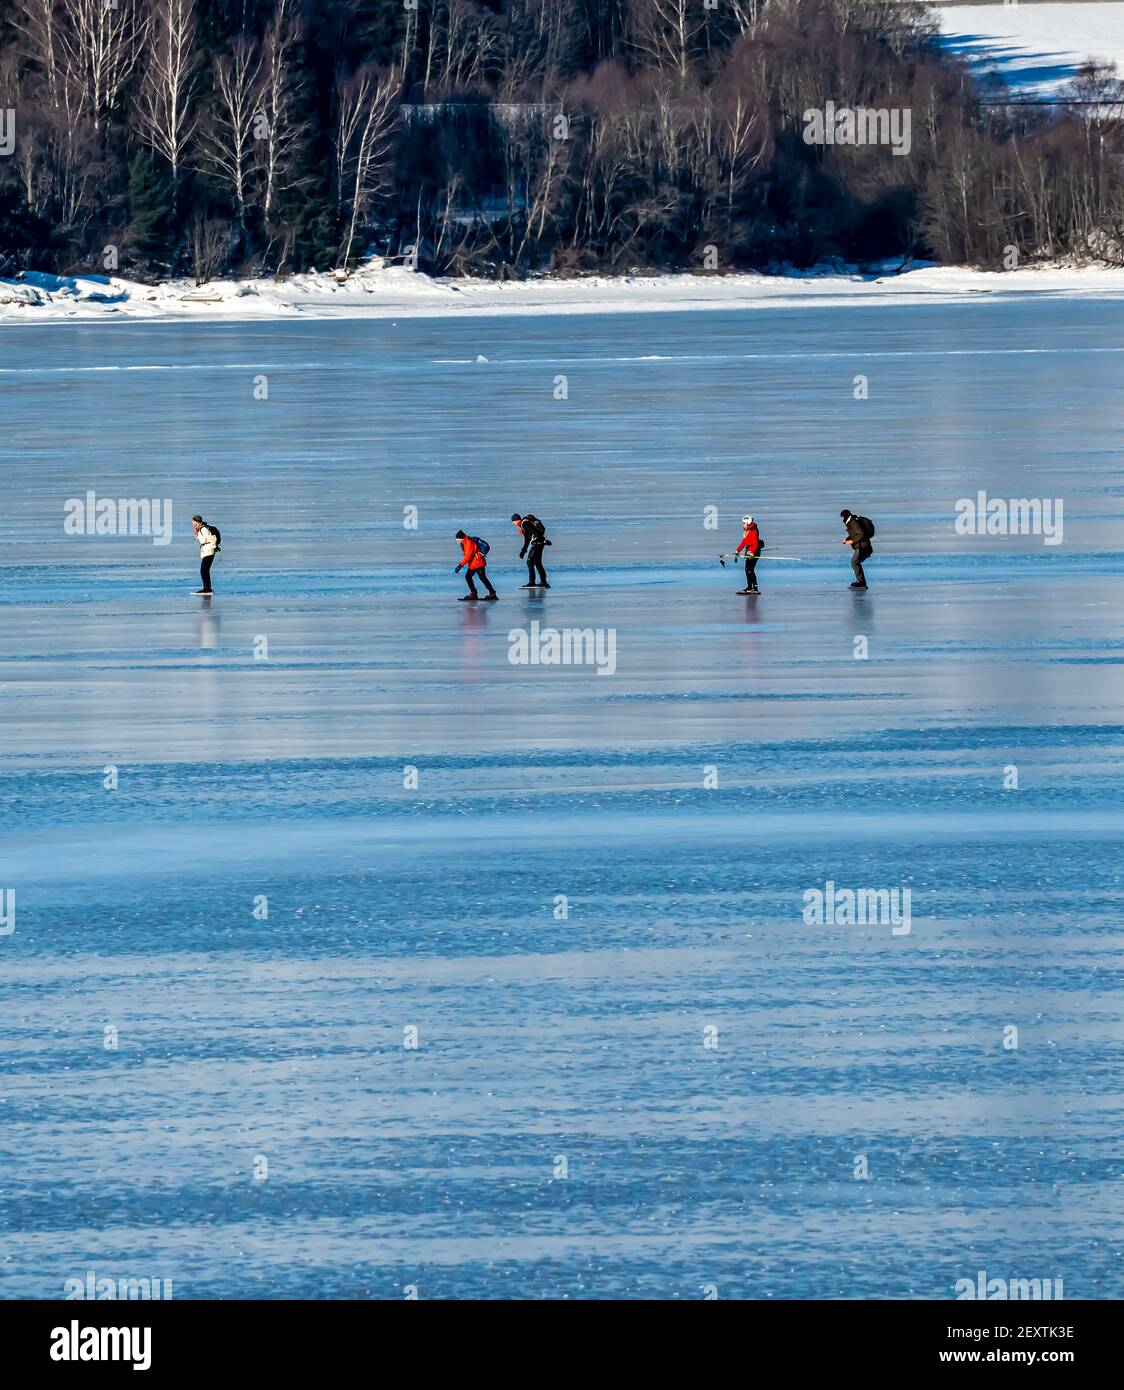 Group of people skating on the clear ice on a frozen sea. Stock Photo